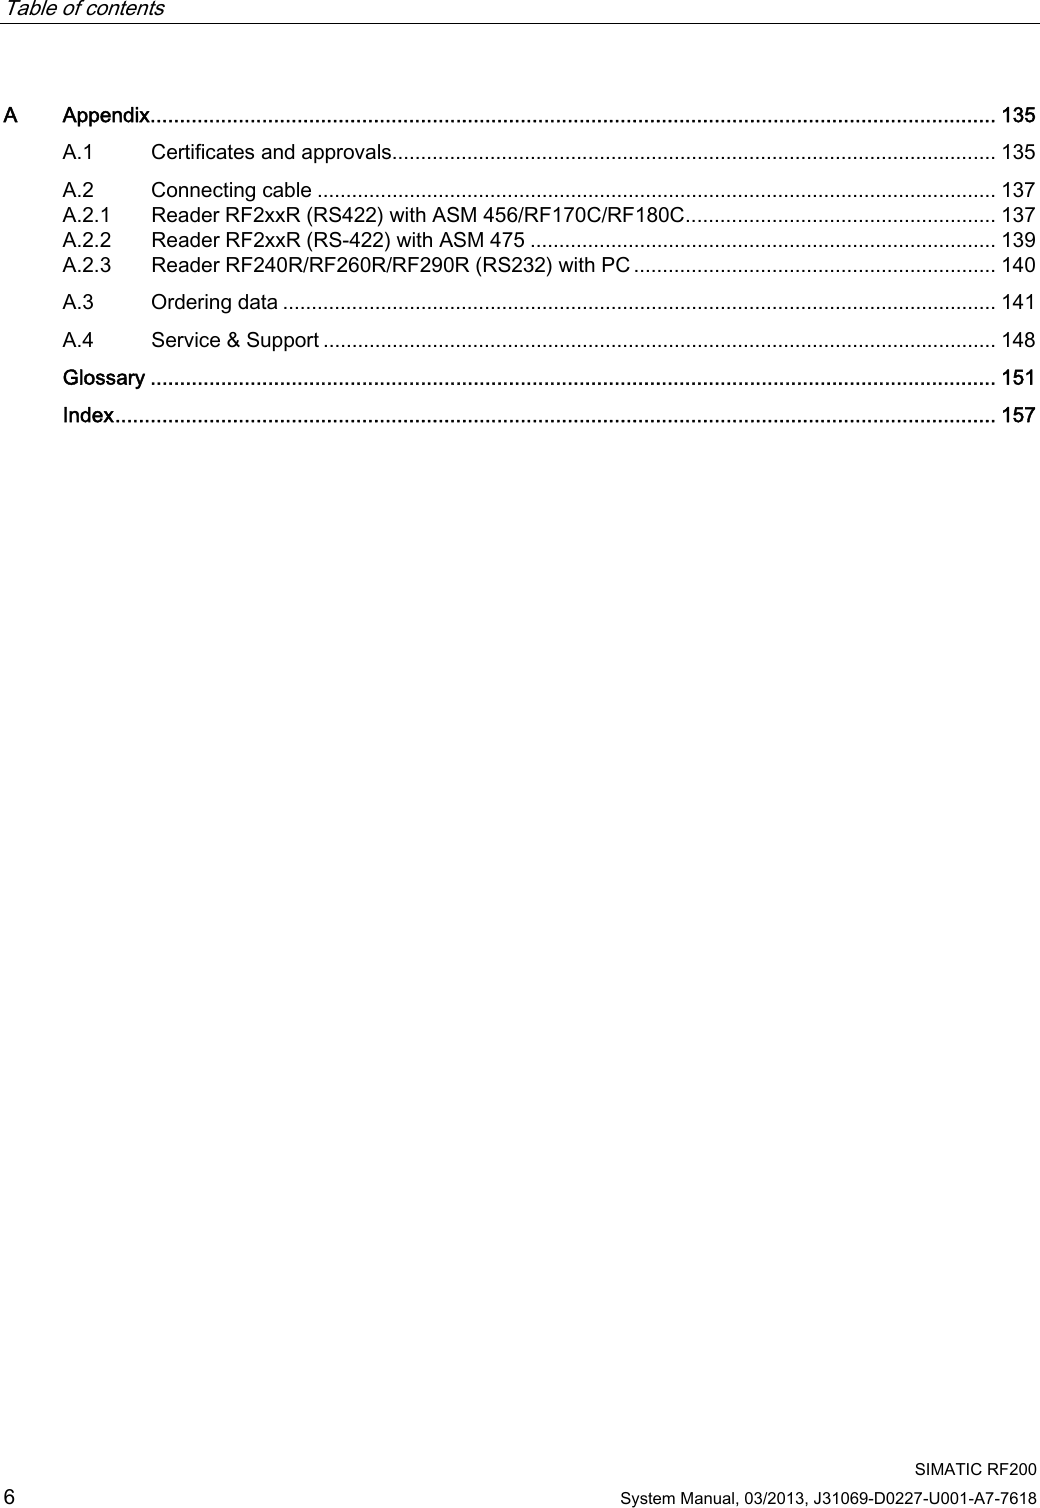 Table of contents      SIMATIC RF200 6 System Manual, 03/2013, J31069-D0227-U001-A7-7618 A  Appendix................................................................................................................................................ 135 A.1  Certificates and approvals......................................................................................................... 135 A.2  Connecting cable ...................................................................................................................... 137 A.2.1  Reader RF2xxR (RS422) with ASM 456/RF170C/RF180C...................................................... 137 A.2.2  Reader RF2xxR (RS-422) with ASM 475 ................................................................................. 139 A.2.3  Reader RF240R/RF260R/RF290R (RS232) with PC ............................................................... 140 A.3  Ordering data ............................................................................................................................ 141 A.4  Service &amp; Support ..................................................................................................................... 148  Glossary ................................................................................................................................................ 151  Index...................................................................................................................................................... 157 